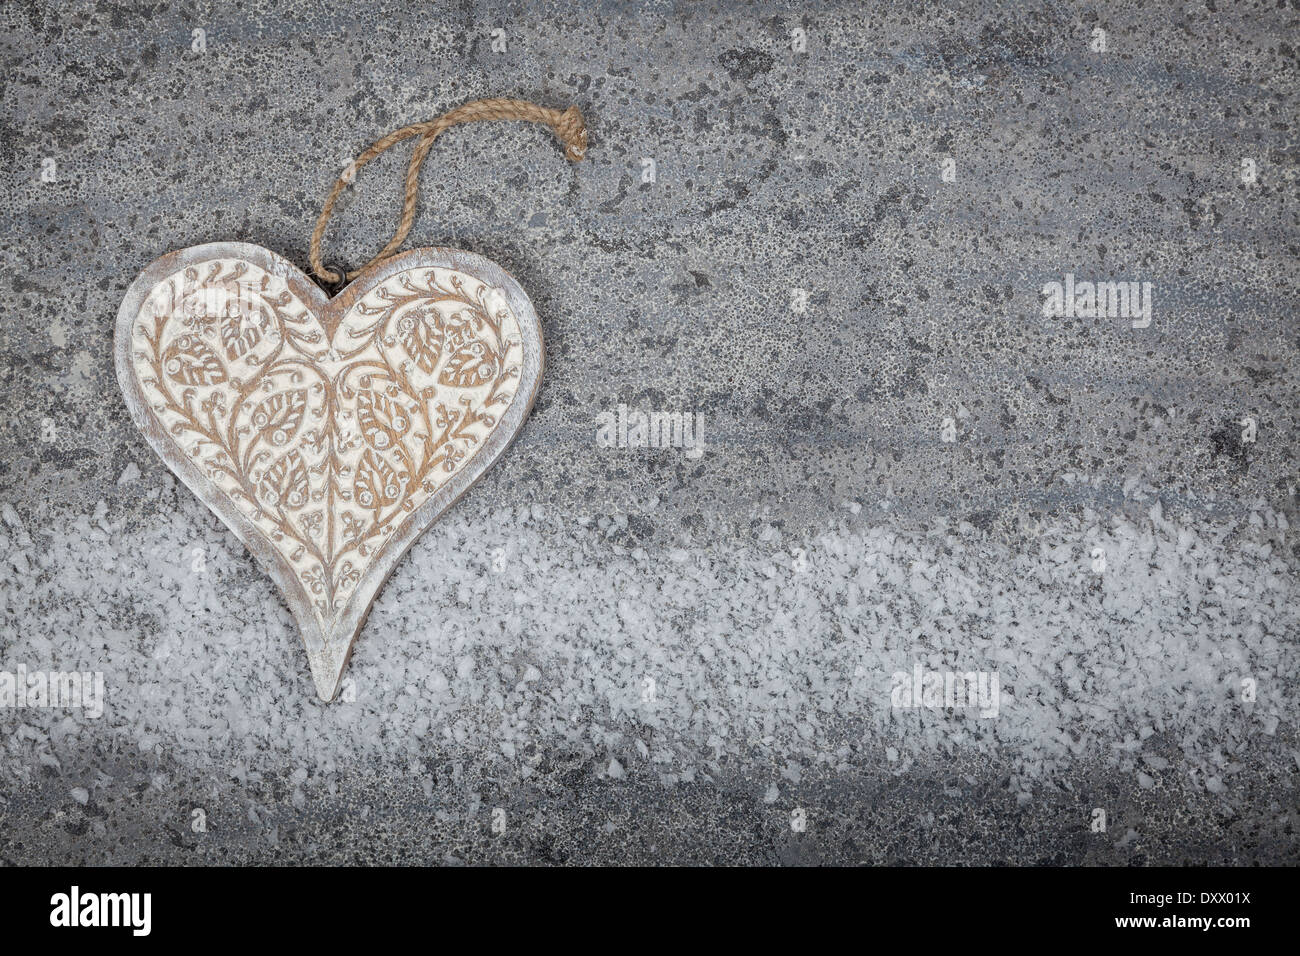 A carved wooden heart on a grey limestone background Stock Photo